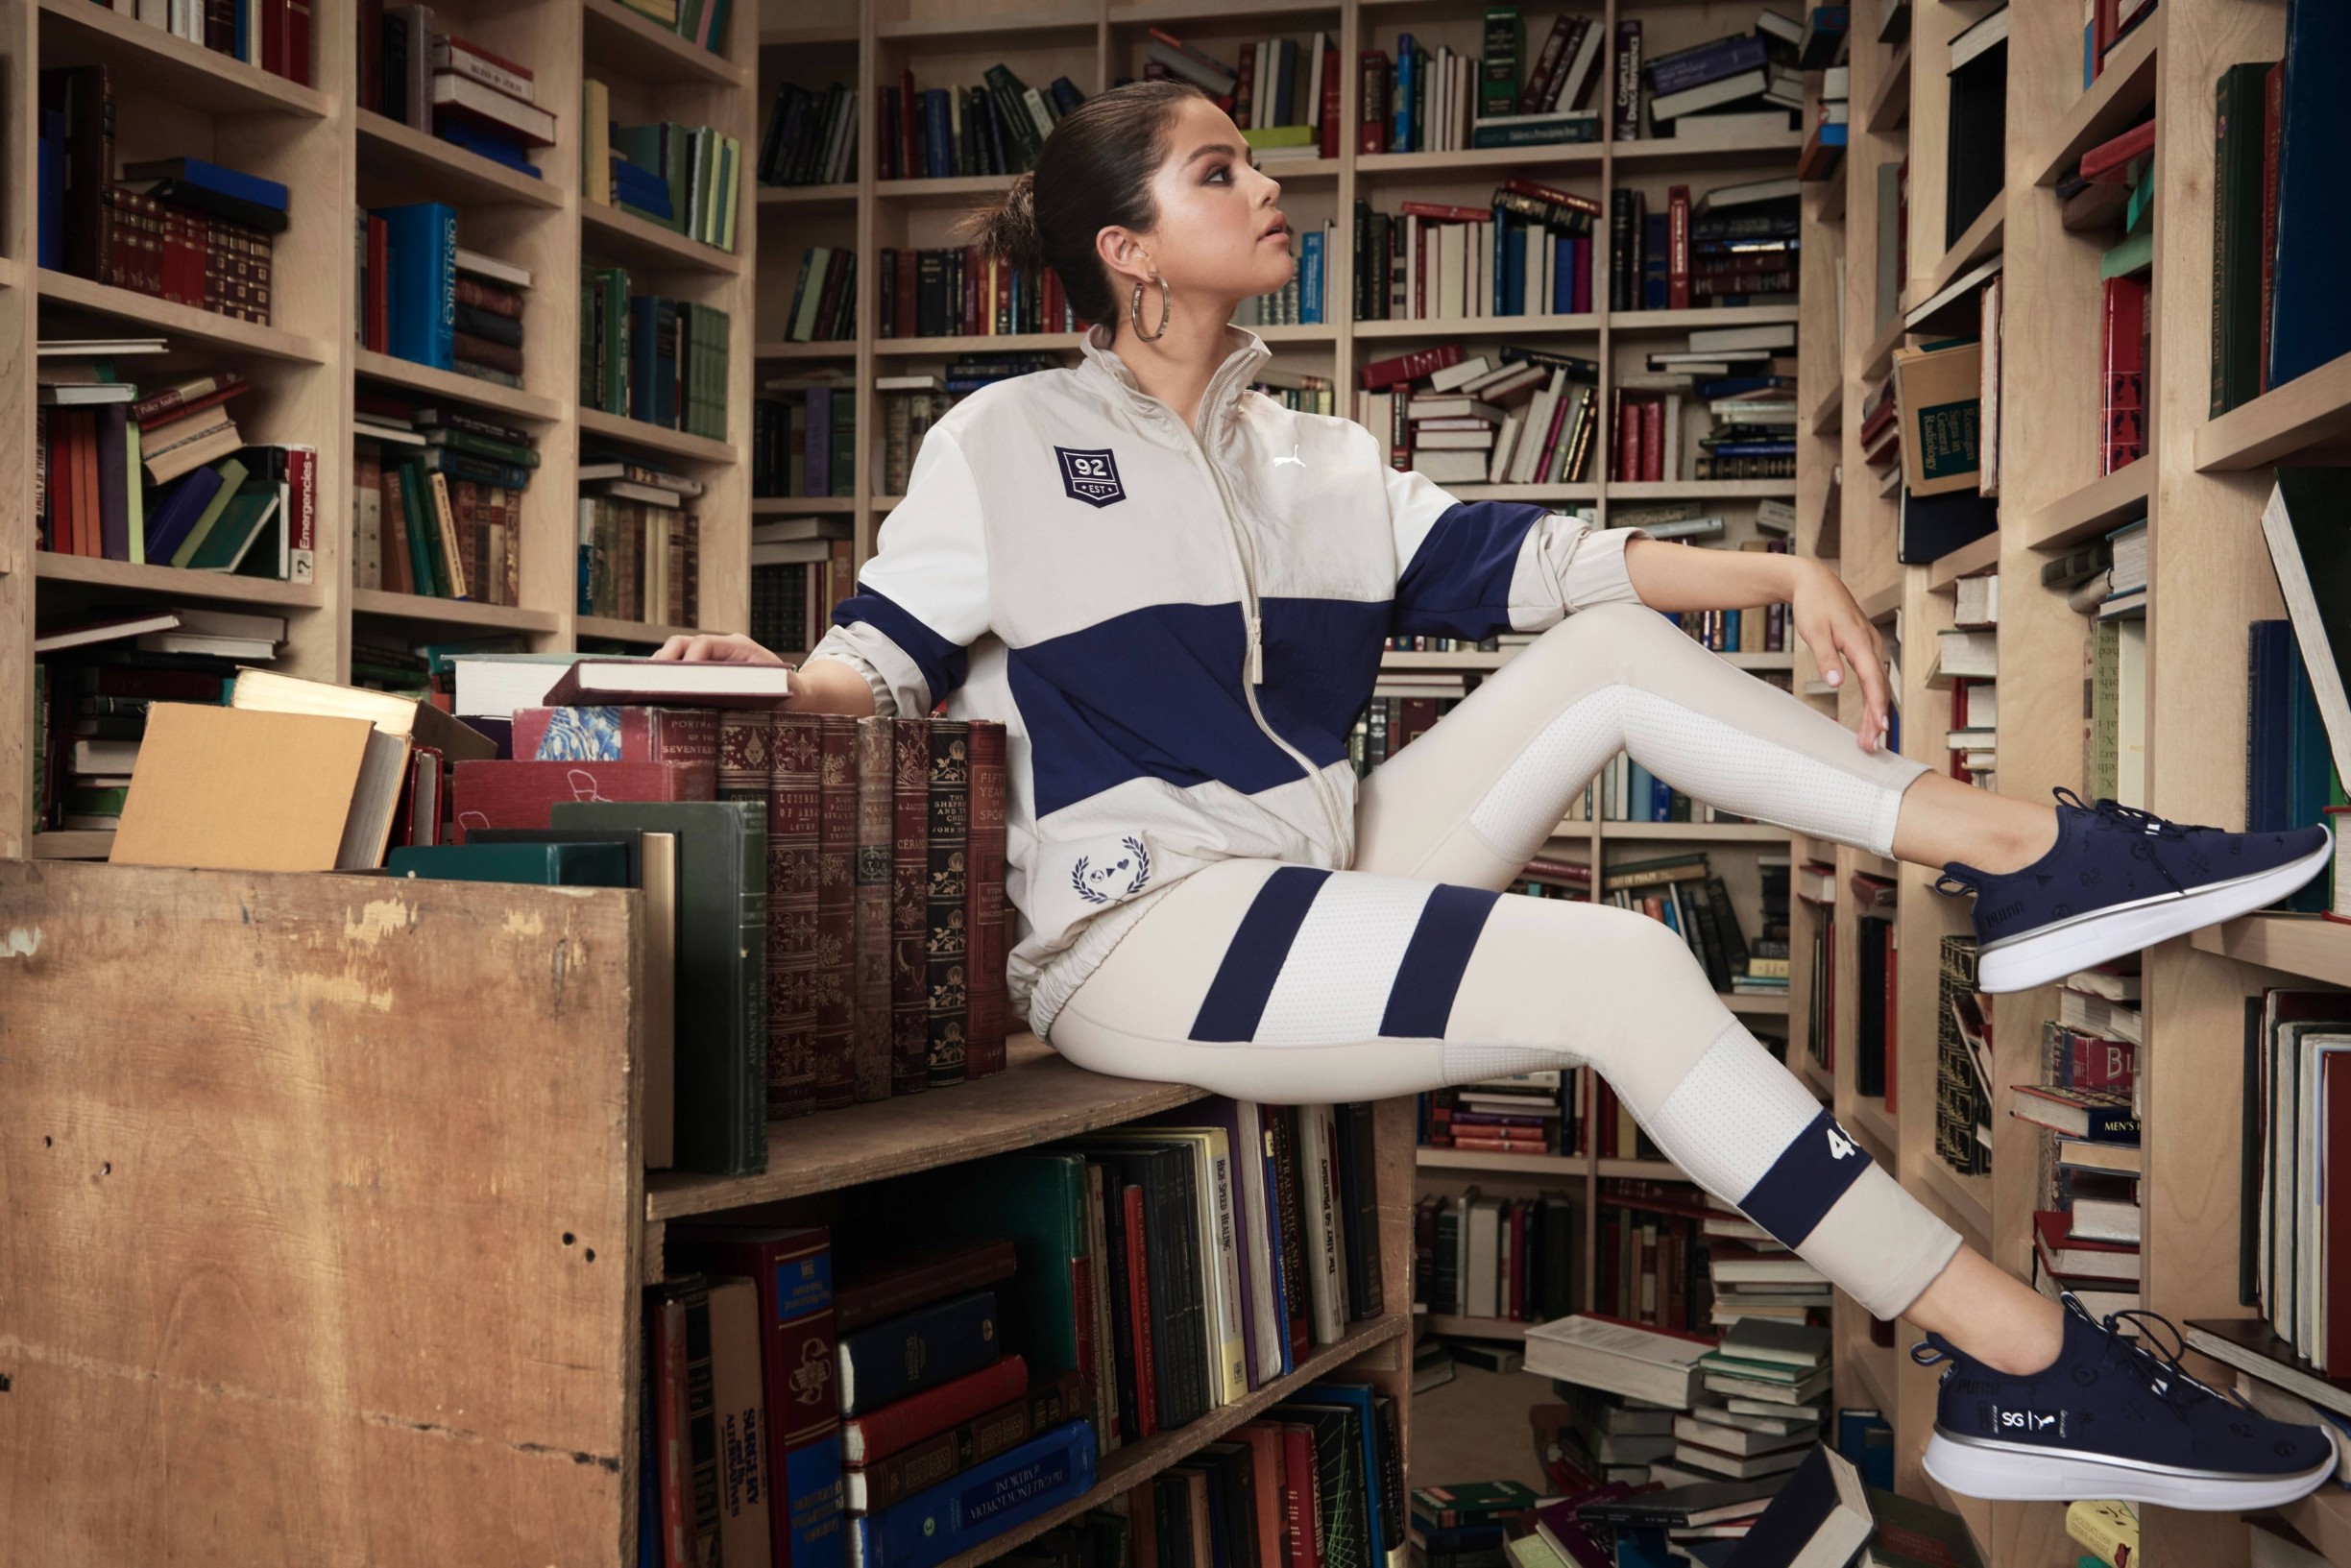 Selena Gomez shows off her literary side - as she balances a book on her head in a fashion campaign.
The singer, 27, showcases a new collection from sportswear giant, Puma - and poses among stacks of textbooks  
The new SG x PUMA line is described as a 